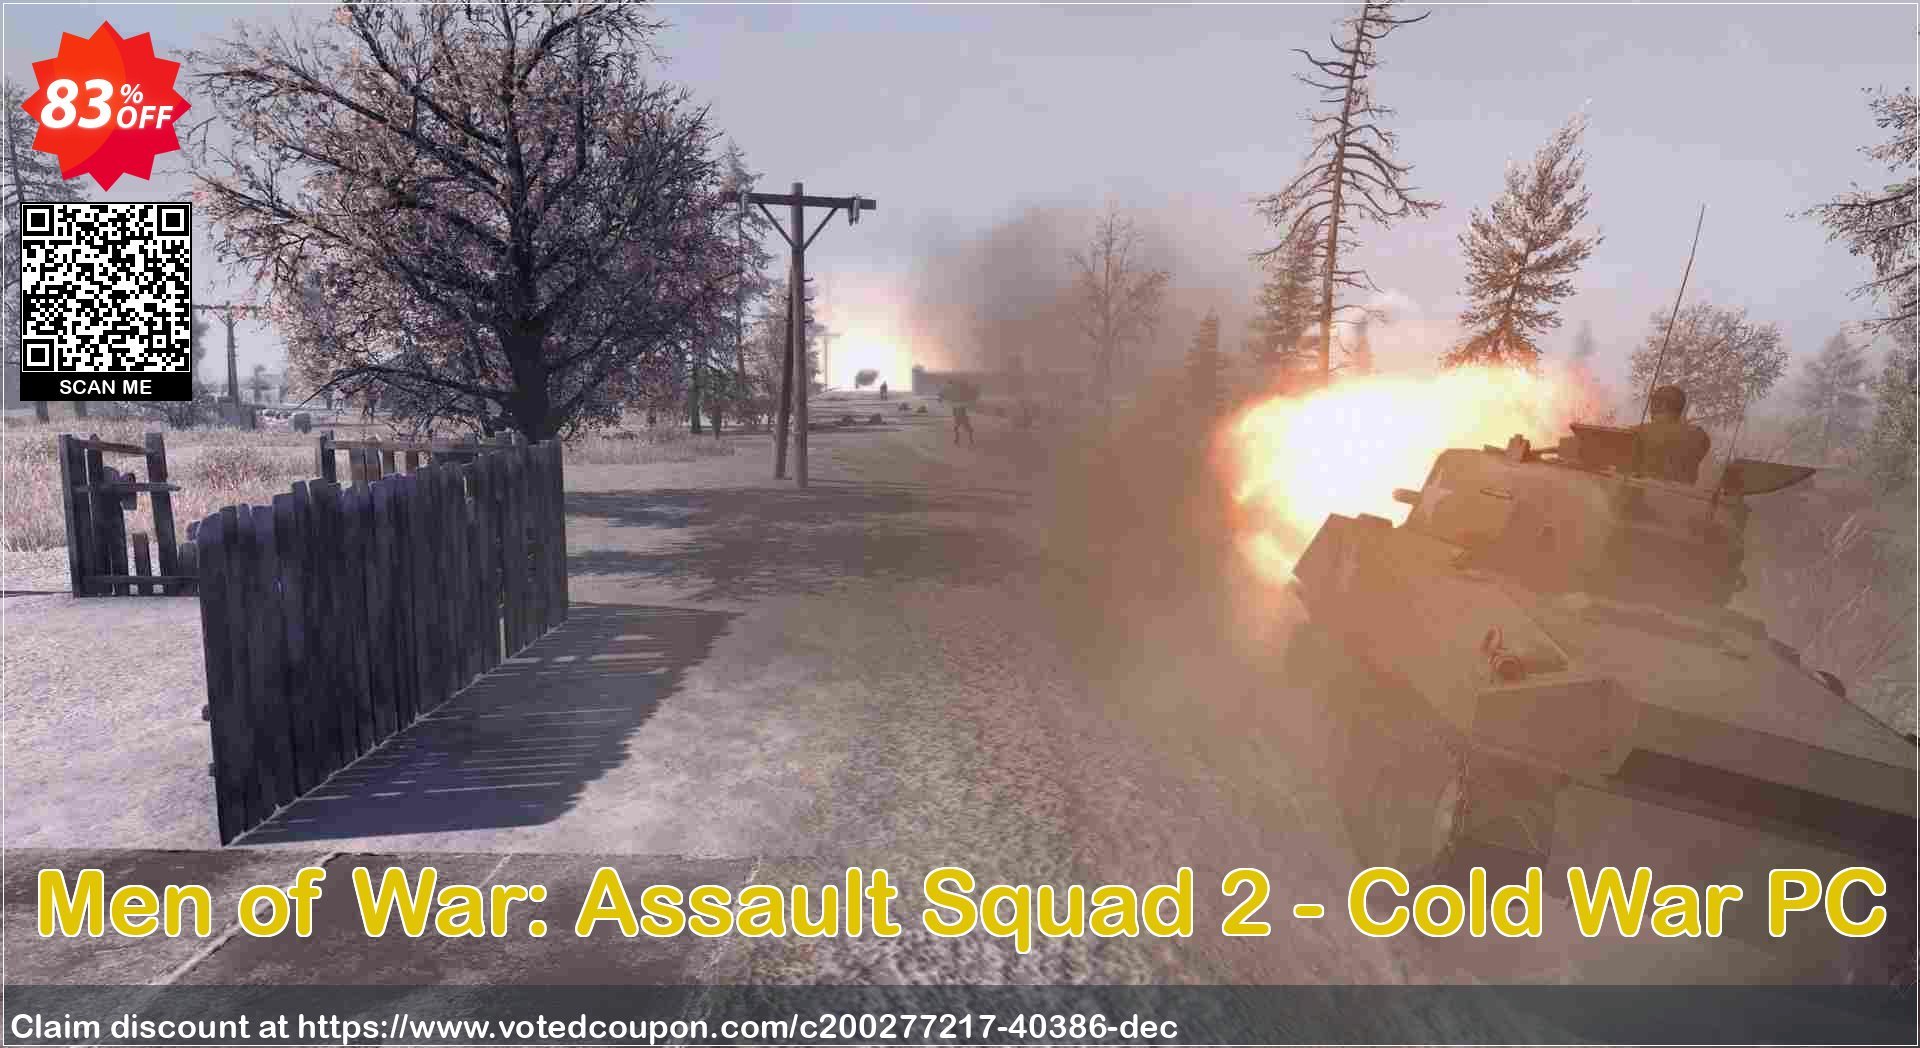 Men of War: Assault Squad 2 - Cold War PC Coupon Code May 2024, 83% OFF - VotedCoupon